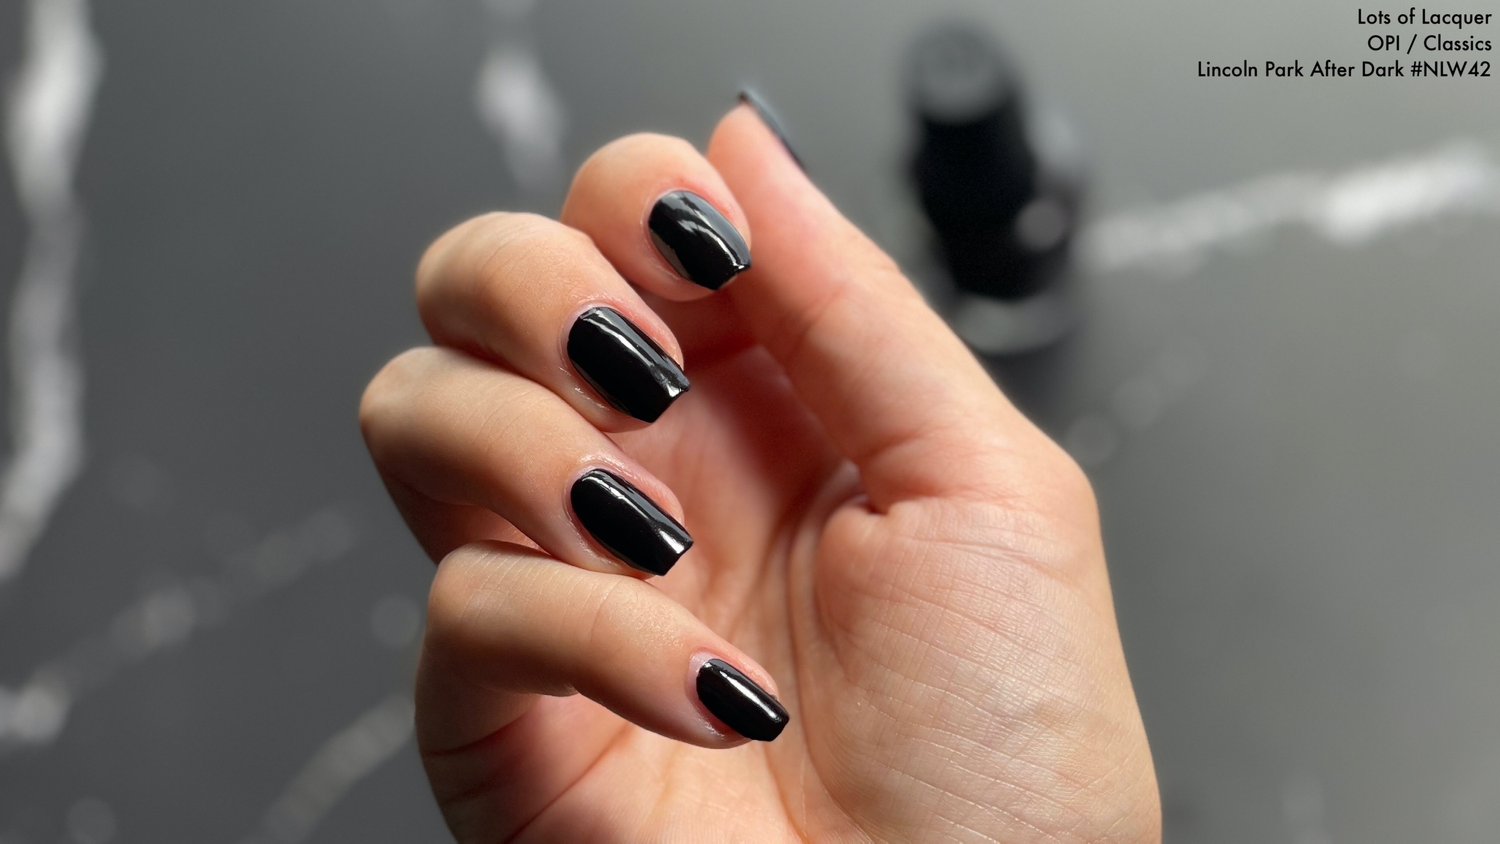 7. OPI Nail Lacquer in "Lincoln Park After Dark" - wide 6